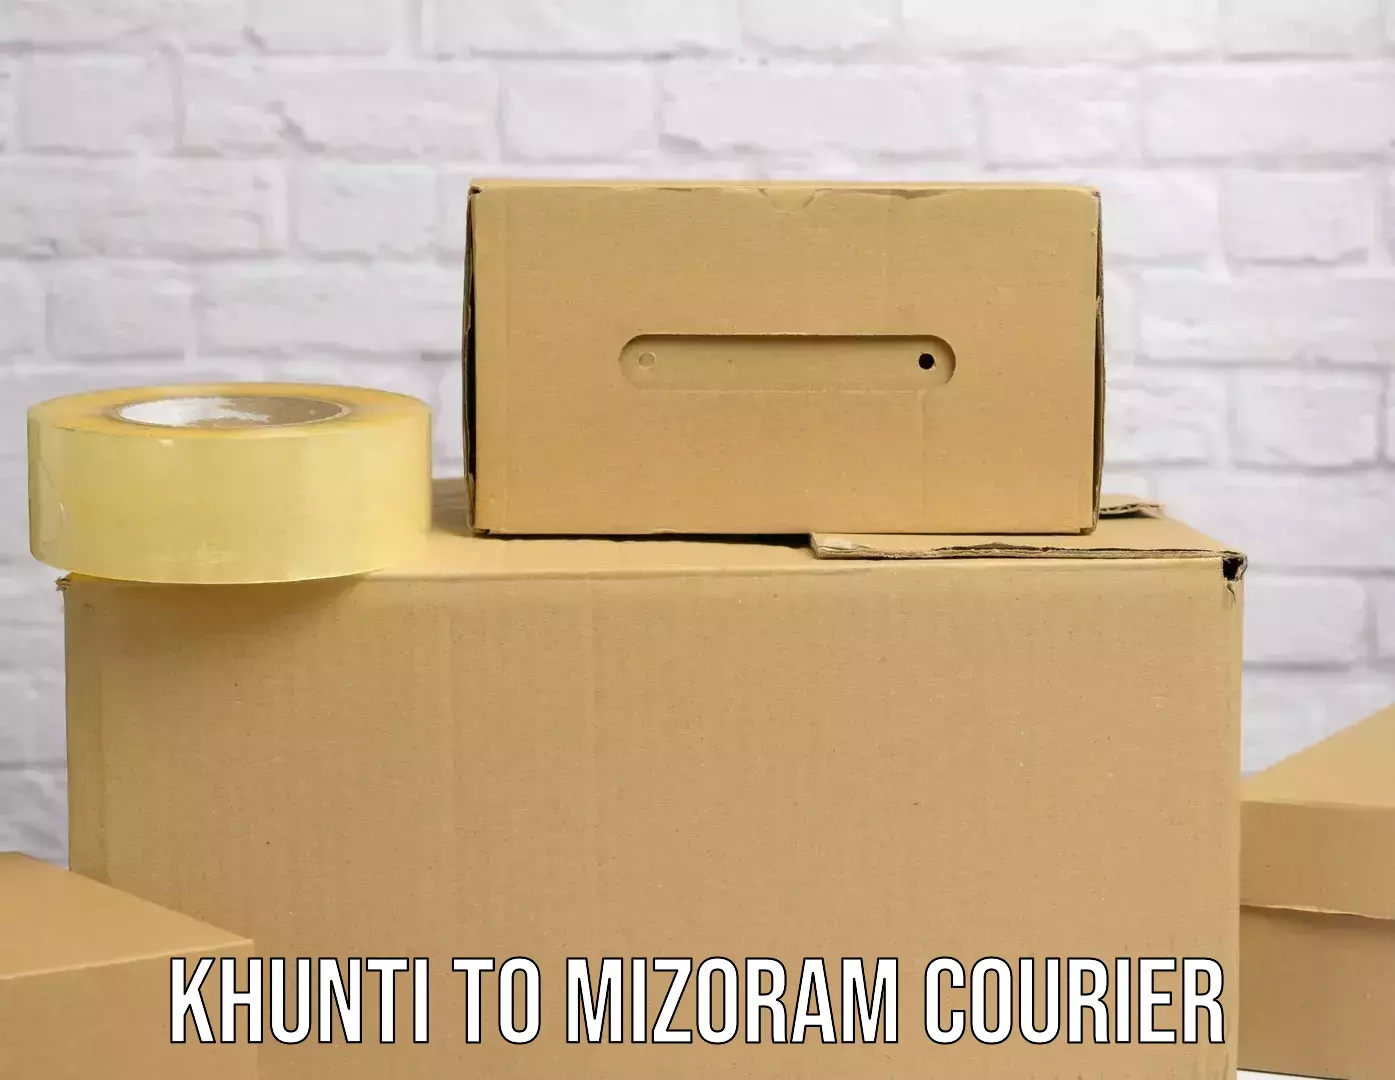 Modern delivery technologies Khunti to Aizawl